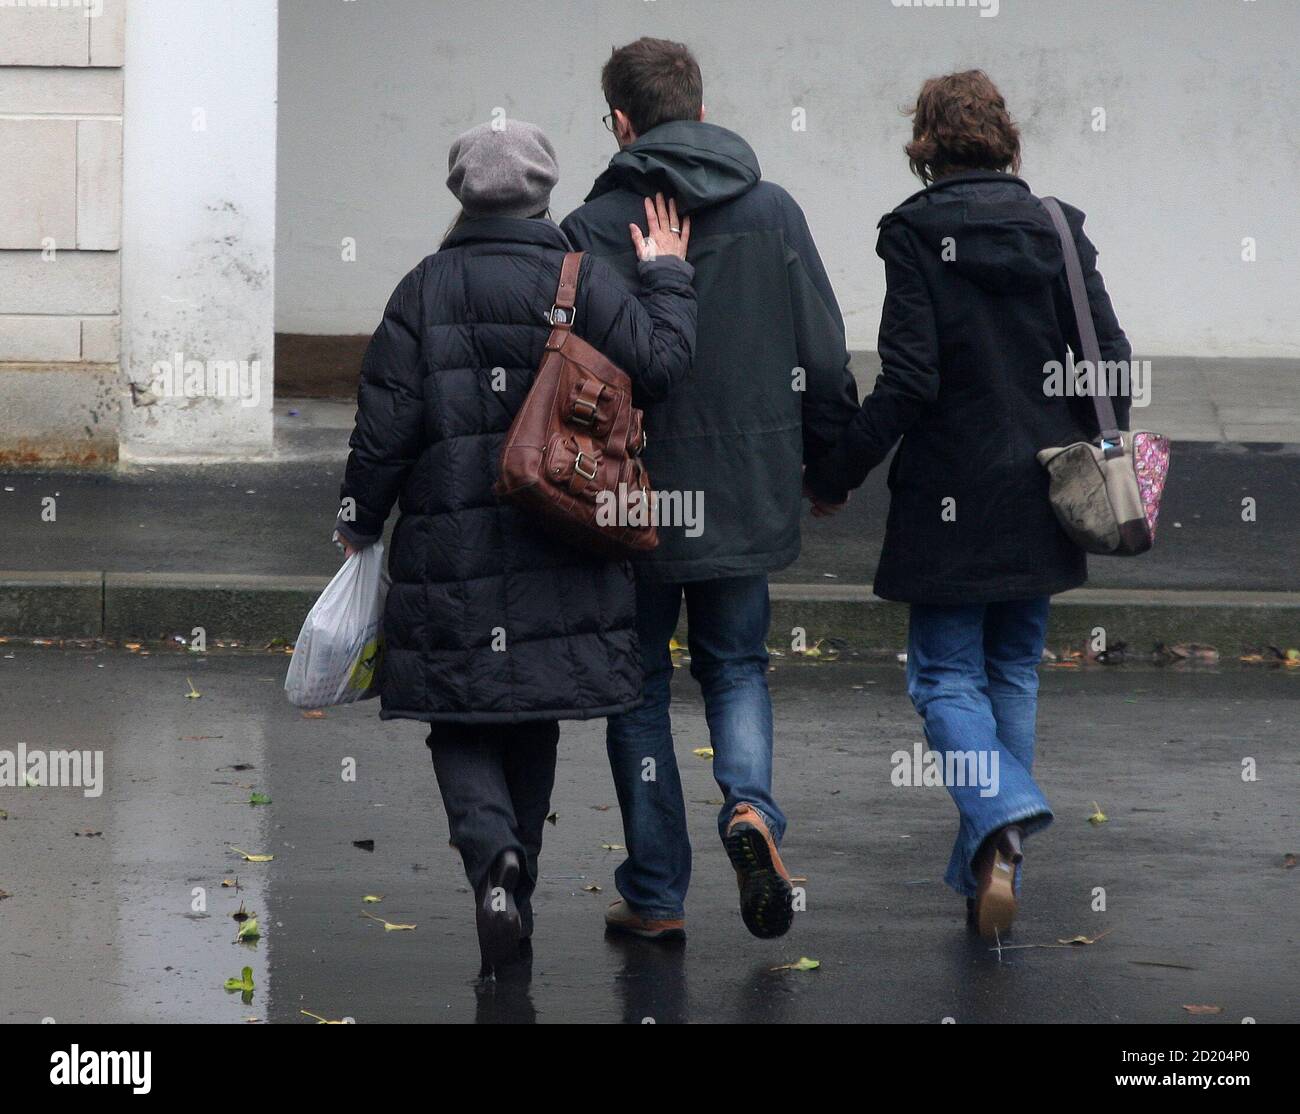 Belgian Marie-Noelle Bouzet (L), the mother of Elisabeth Brichet who was a  victim of the French self-confessed serial killer Michel Fourniret, arrives  with her son Thomas (C) and an unidentified woman at